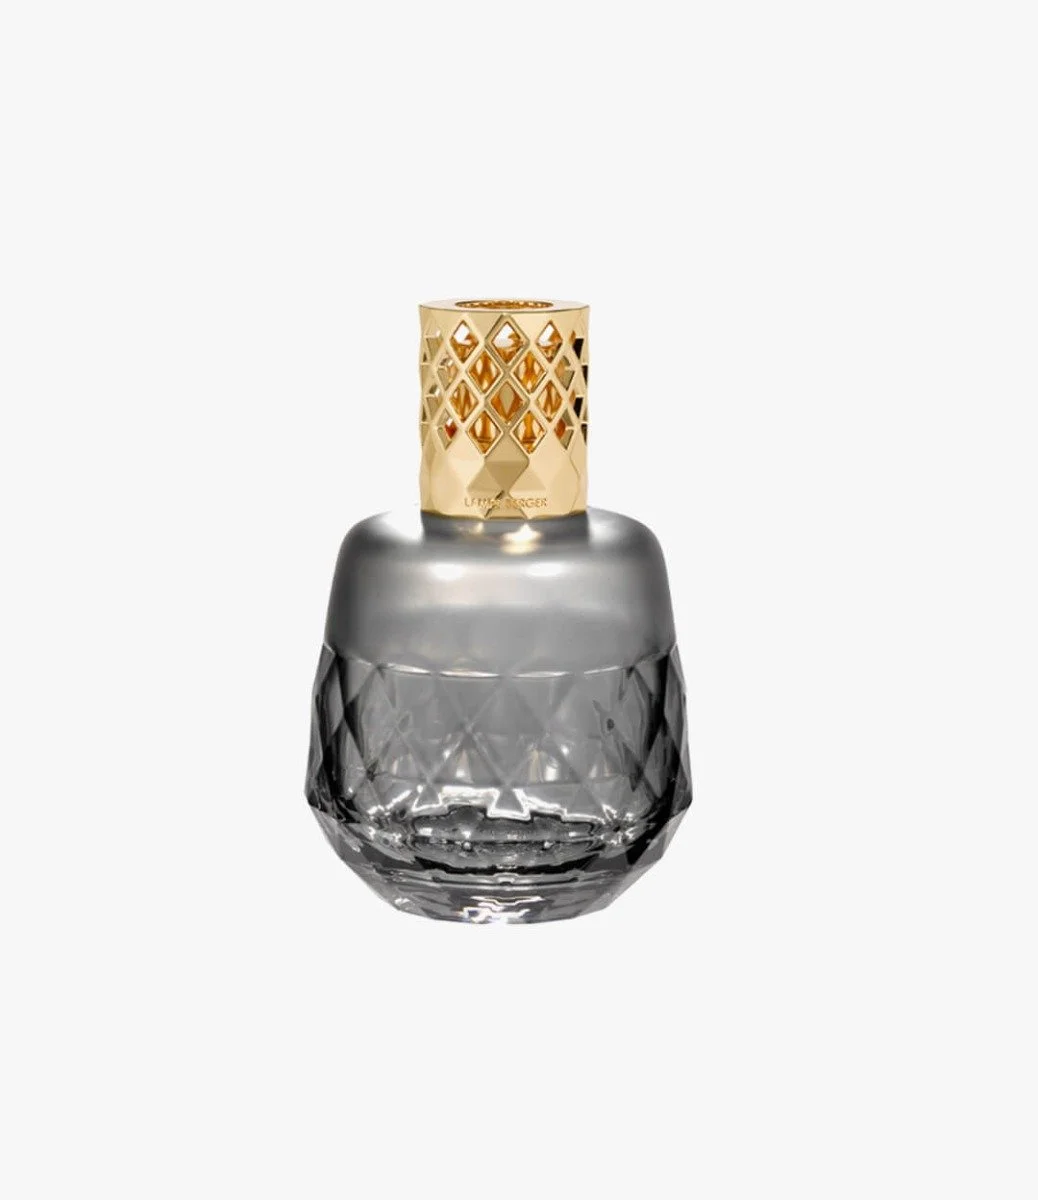 Grey Clarity diffuser By Maison Berger Paris